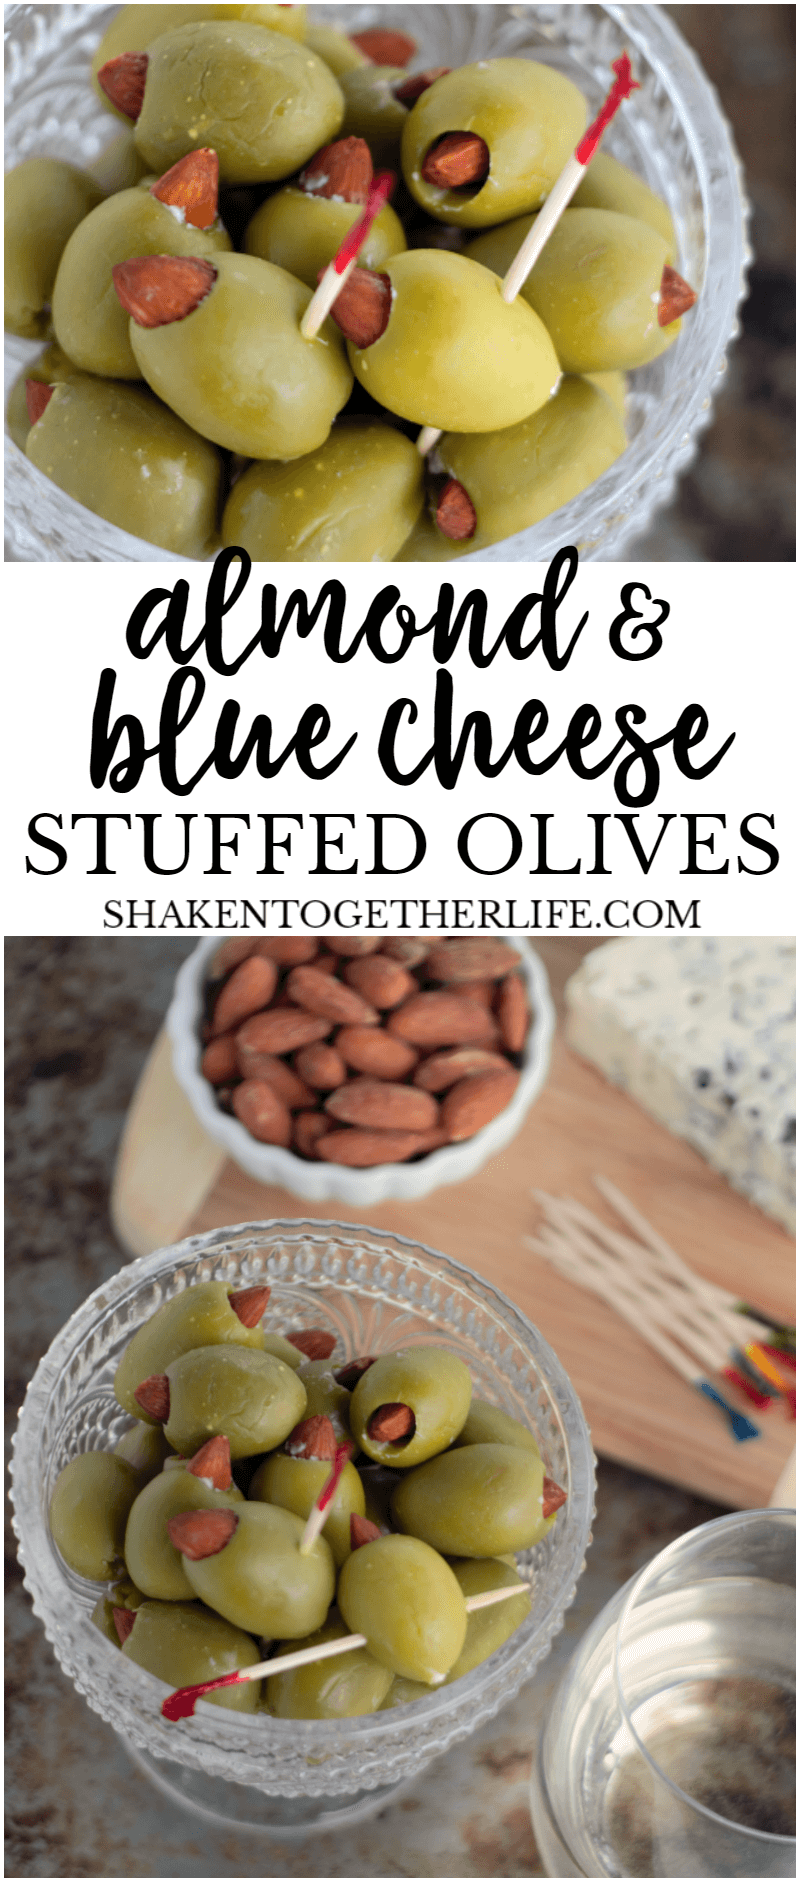 Almond & Blue Cheese Stuffed Olives are totally addictive! Easy appetizer for a cheese board or your game day spread!